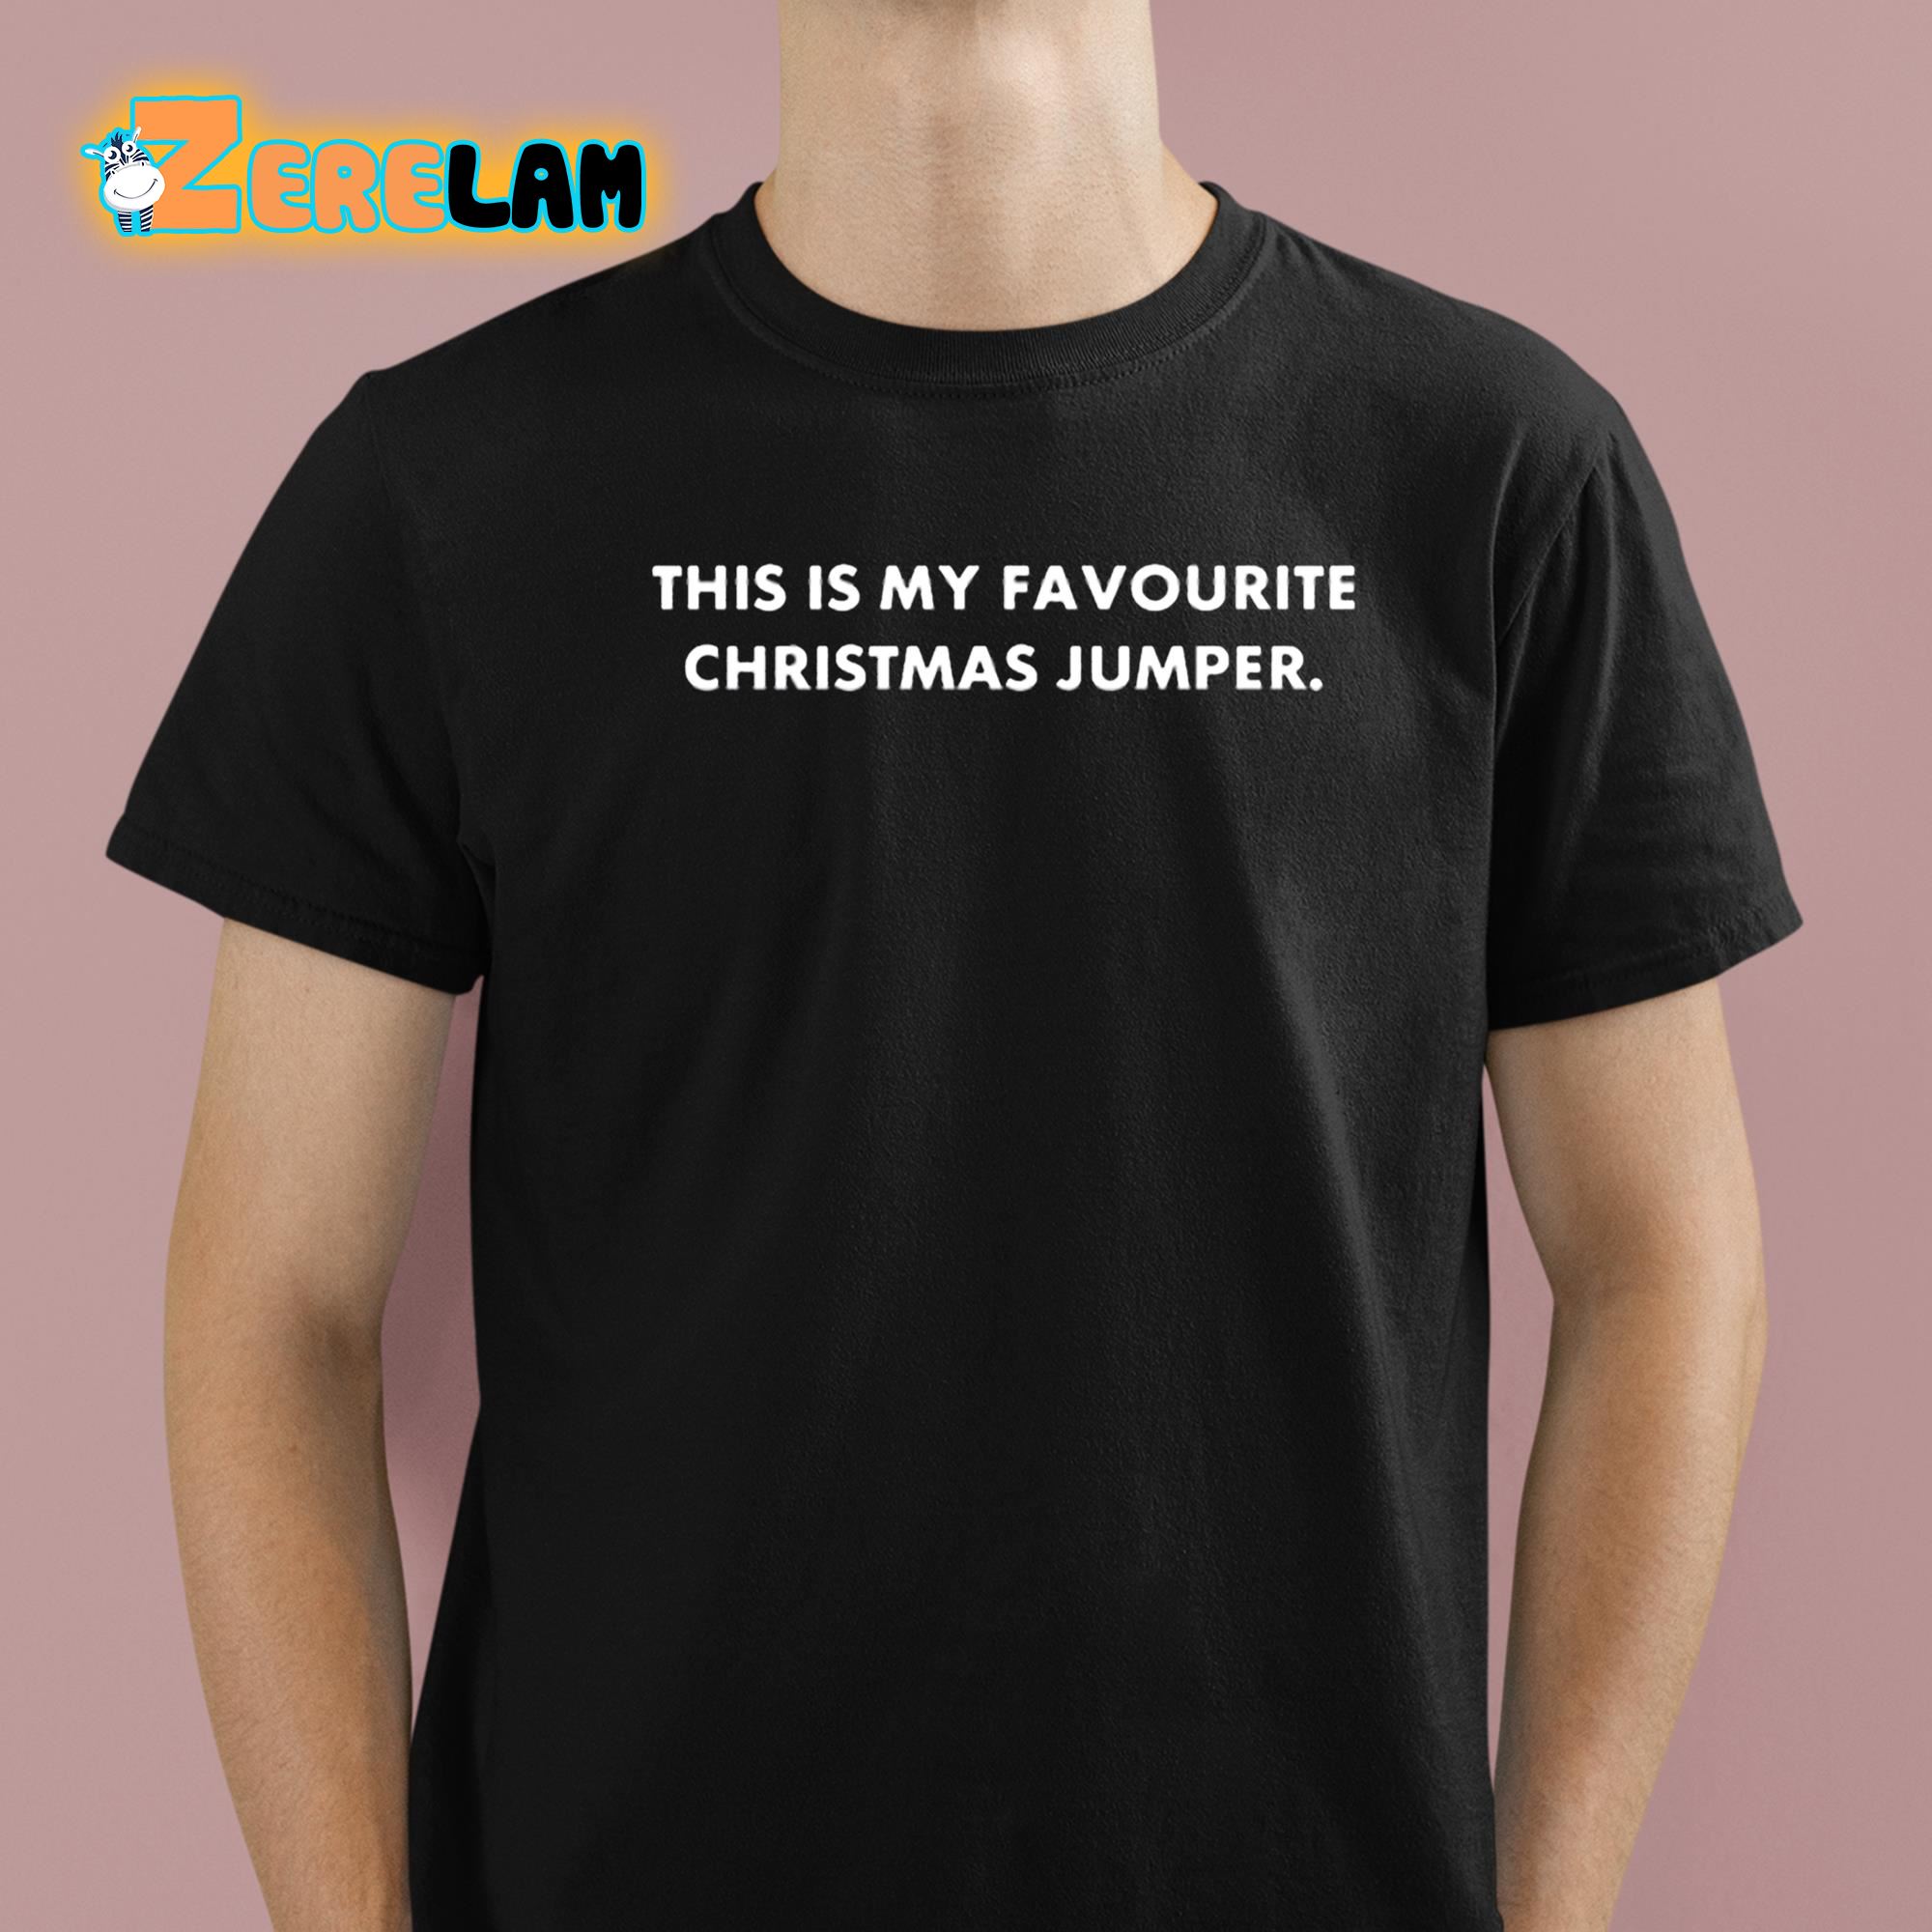 Janey Godley This Is My Favourite Christmas Jumper Shirt 1 1